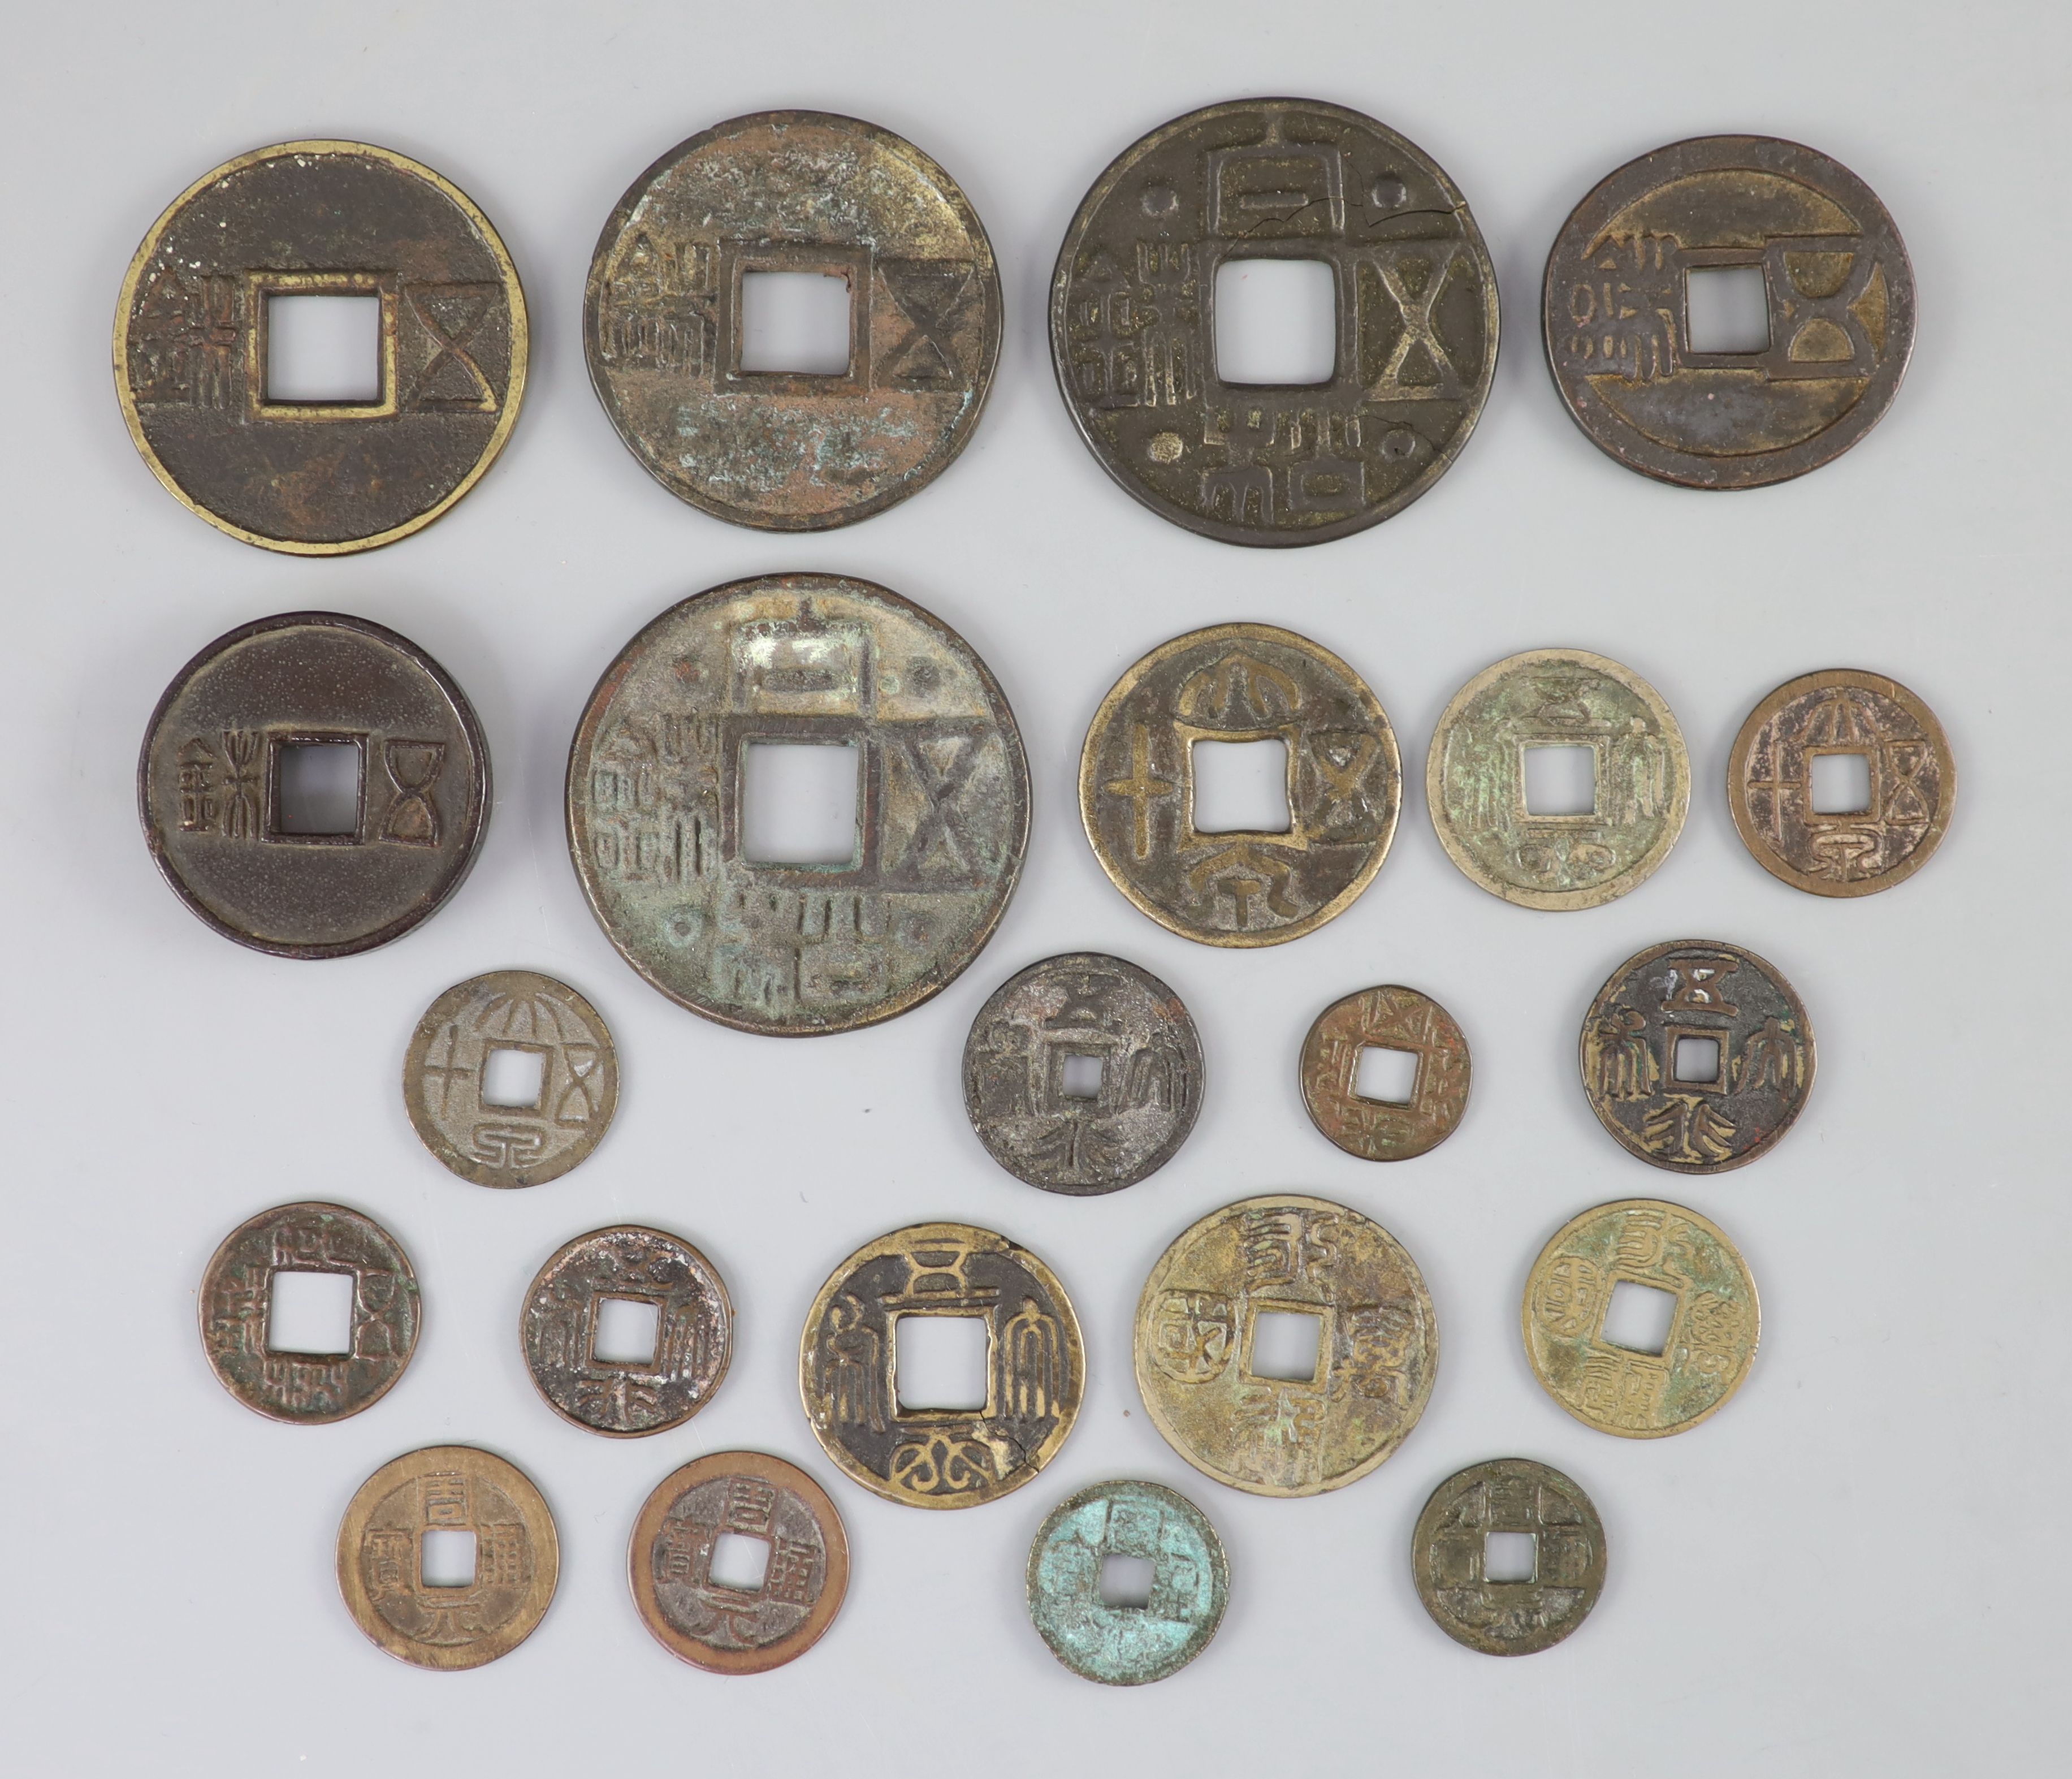 China, a group of 6 bronze coin charms or amulets, 19th century and various Thai (Siamese) porcelain